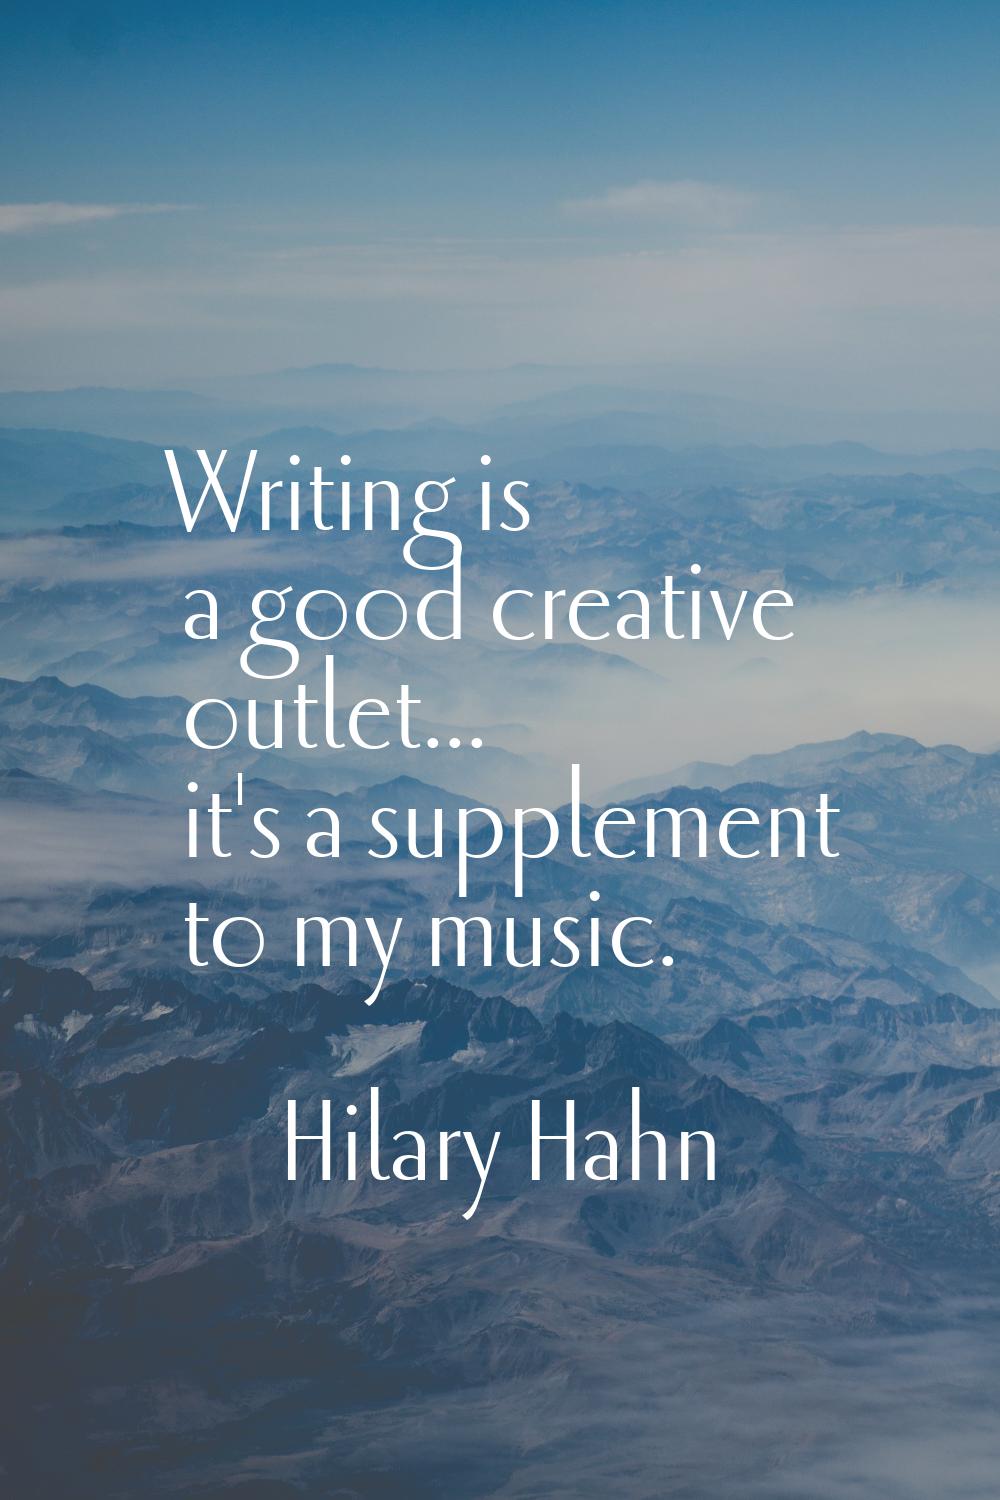 Writing is a good creative outlet... it's a supplement to my music.